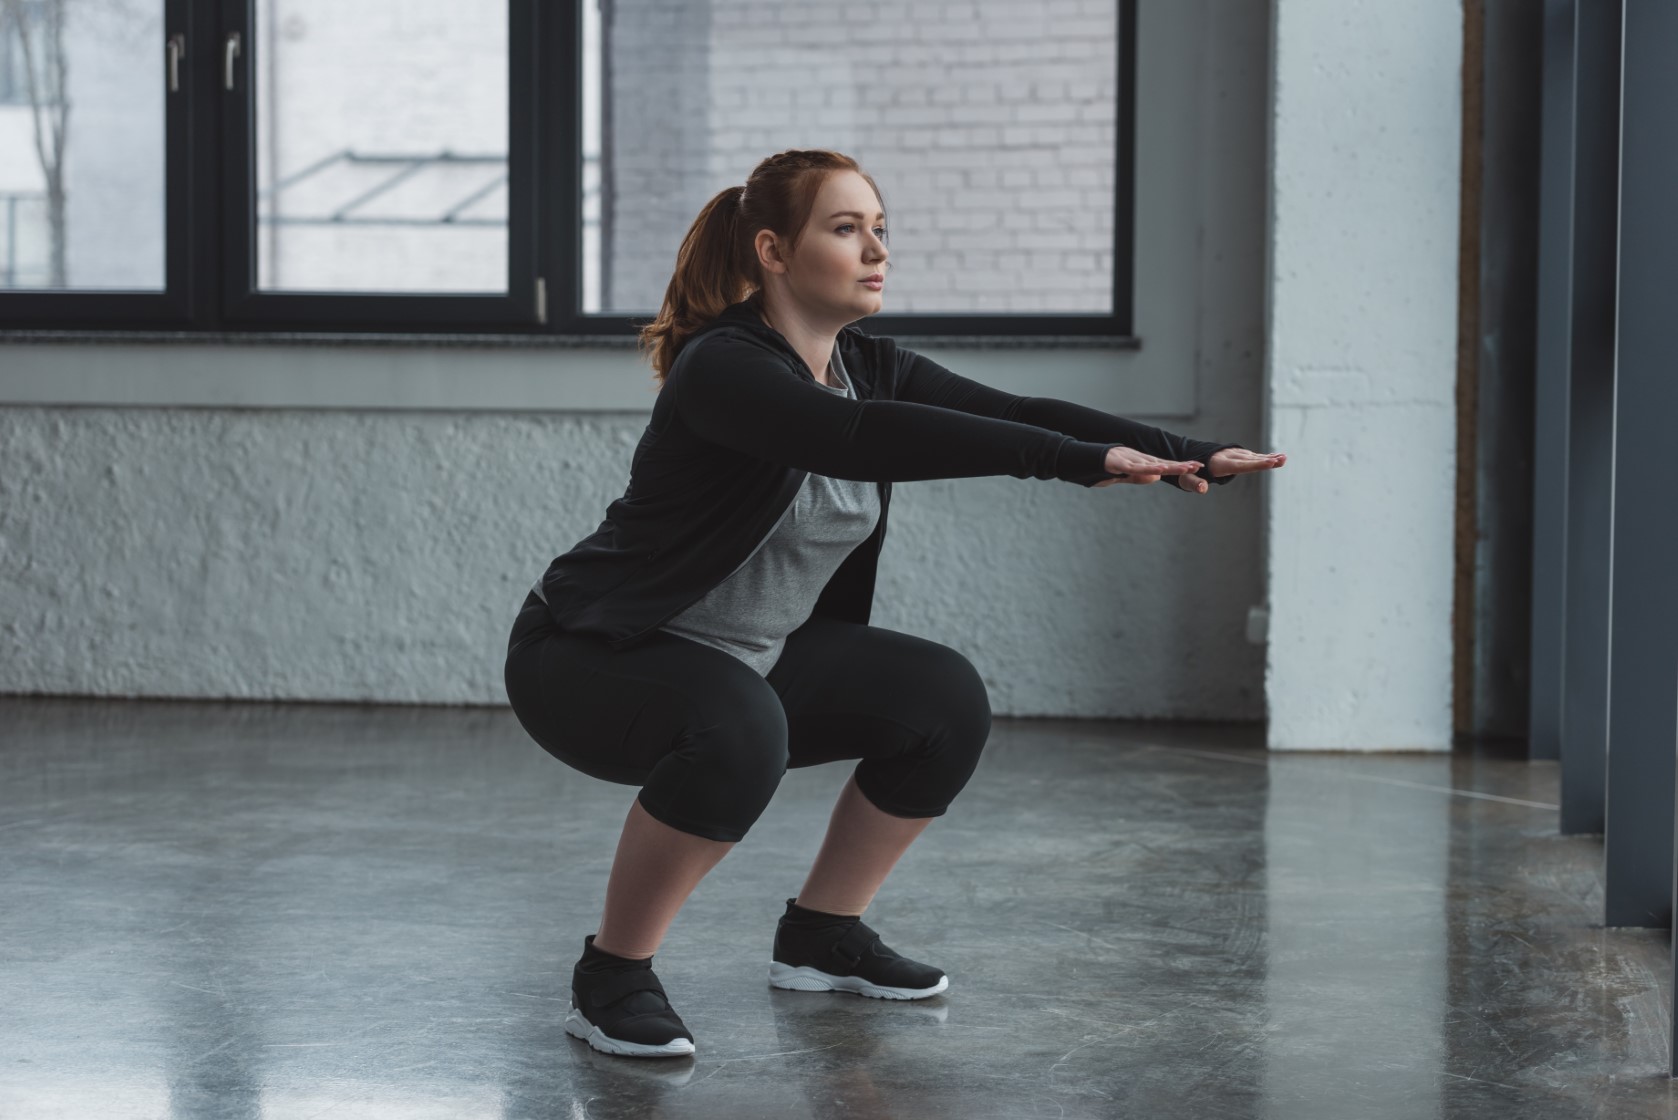 16 tips for weight loss: squatting